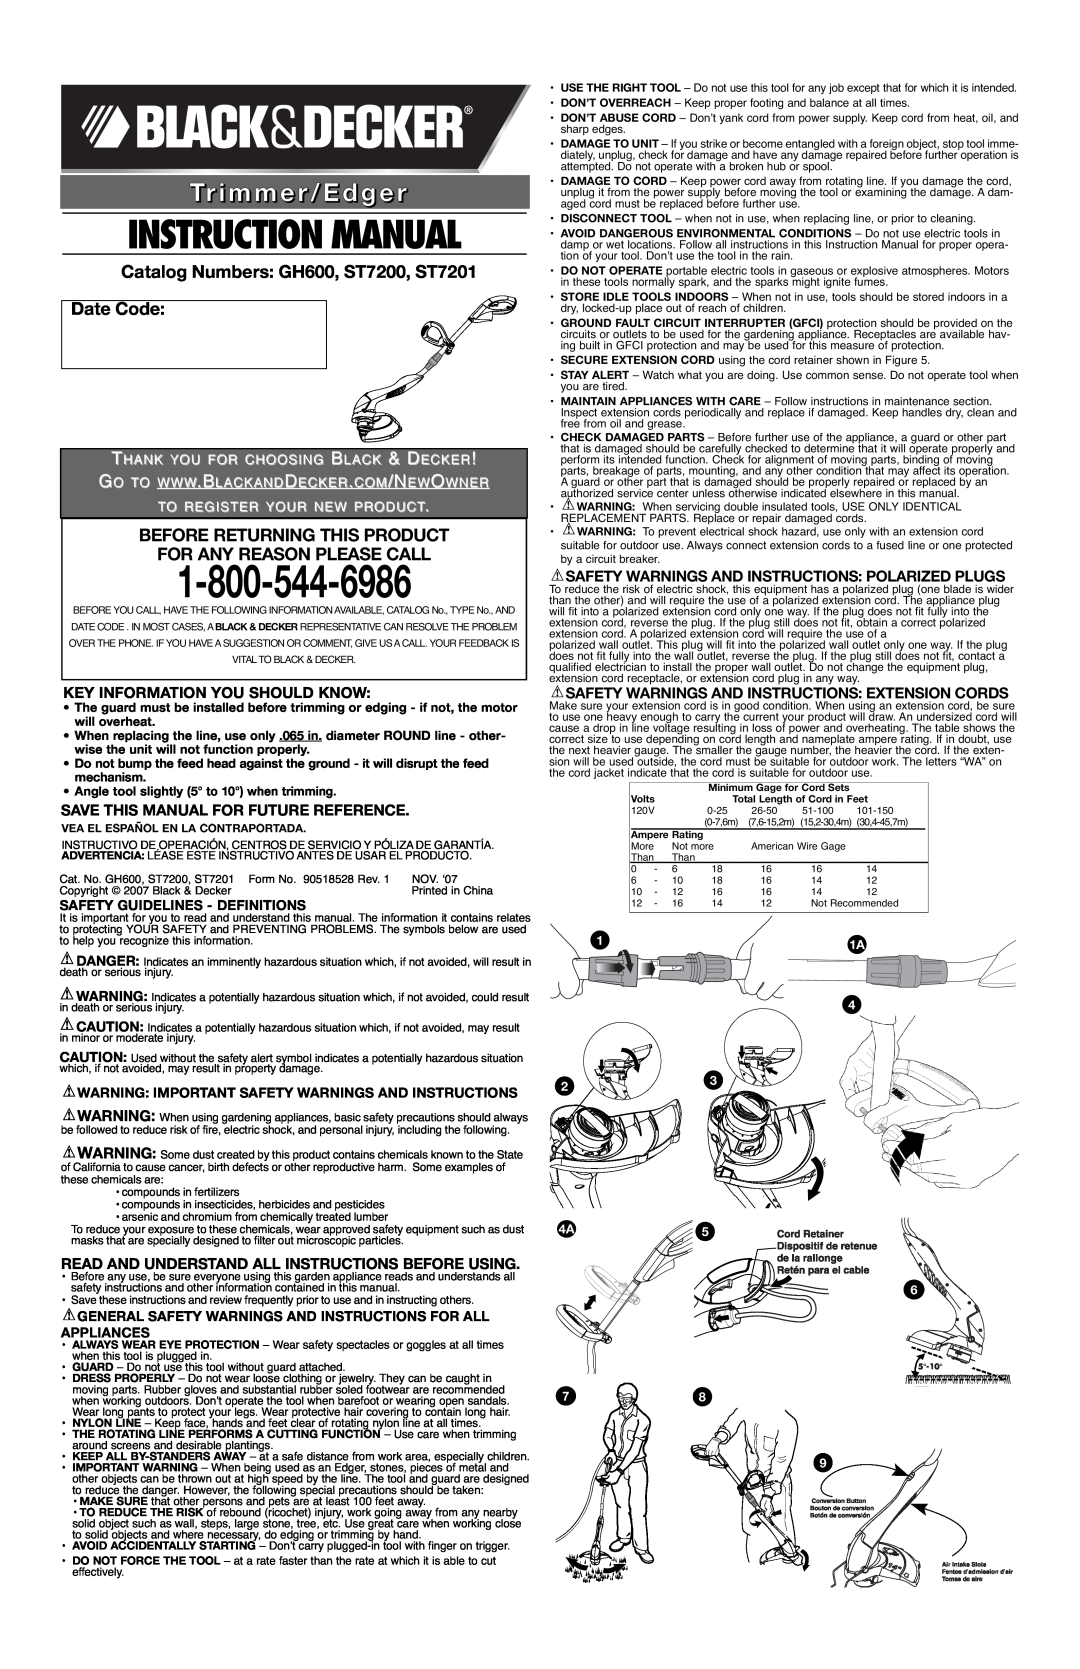 Black & Decker instruction manual Catalog Numbers GH600, ST7200, ST7201 Date Code, Before Returning This Product 